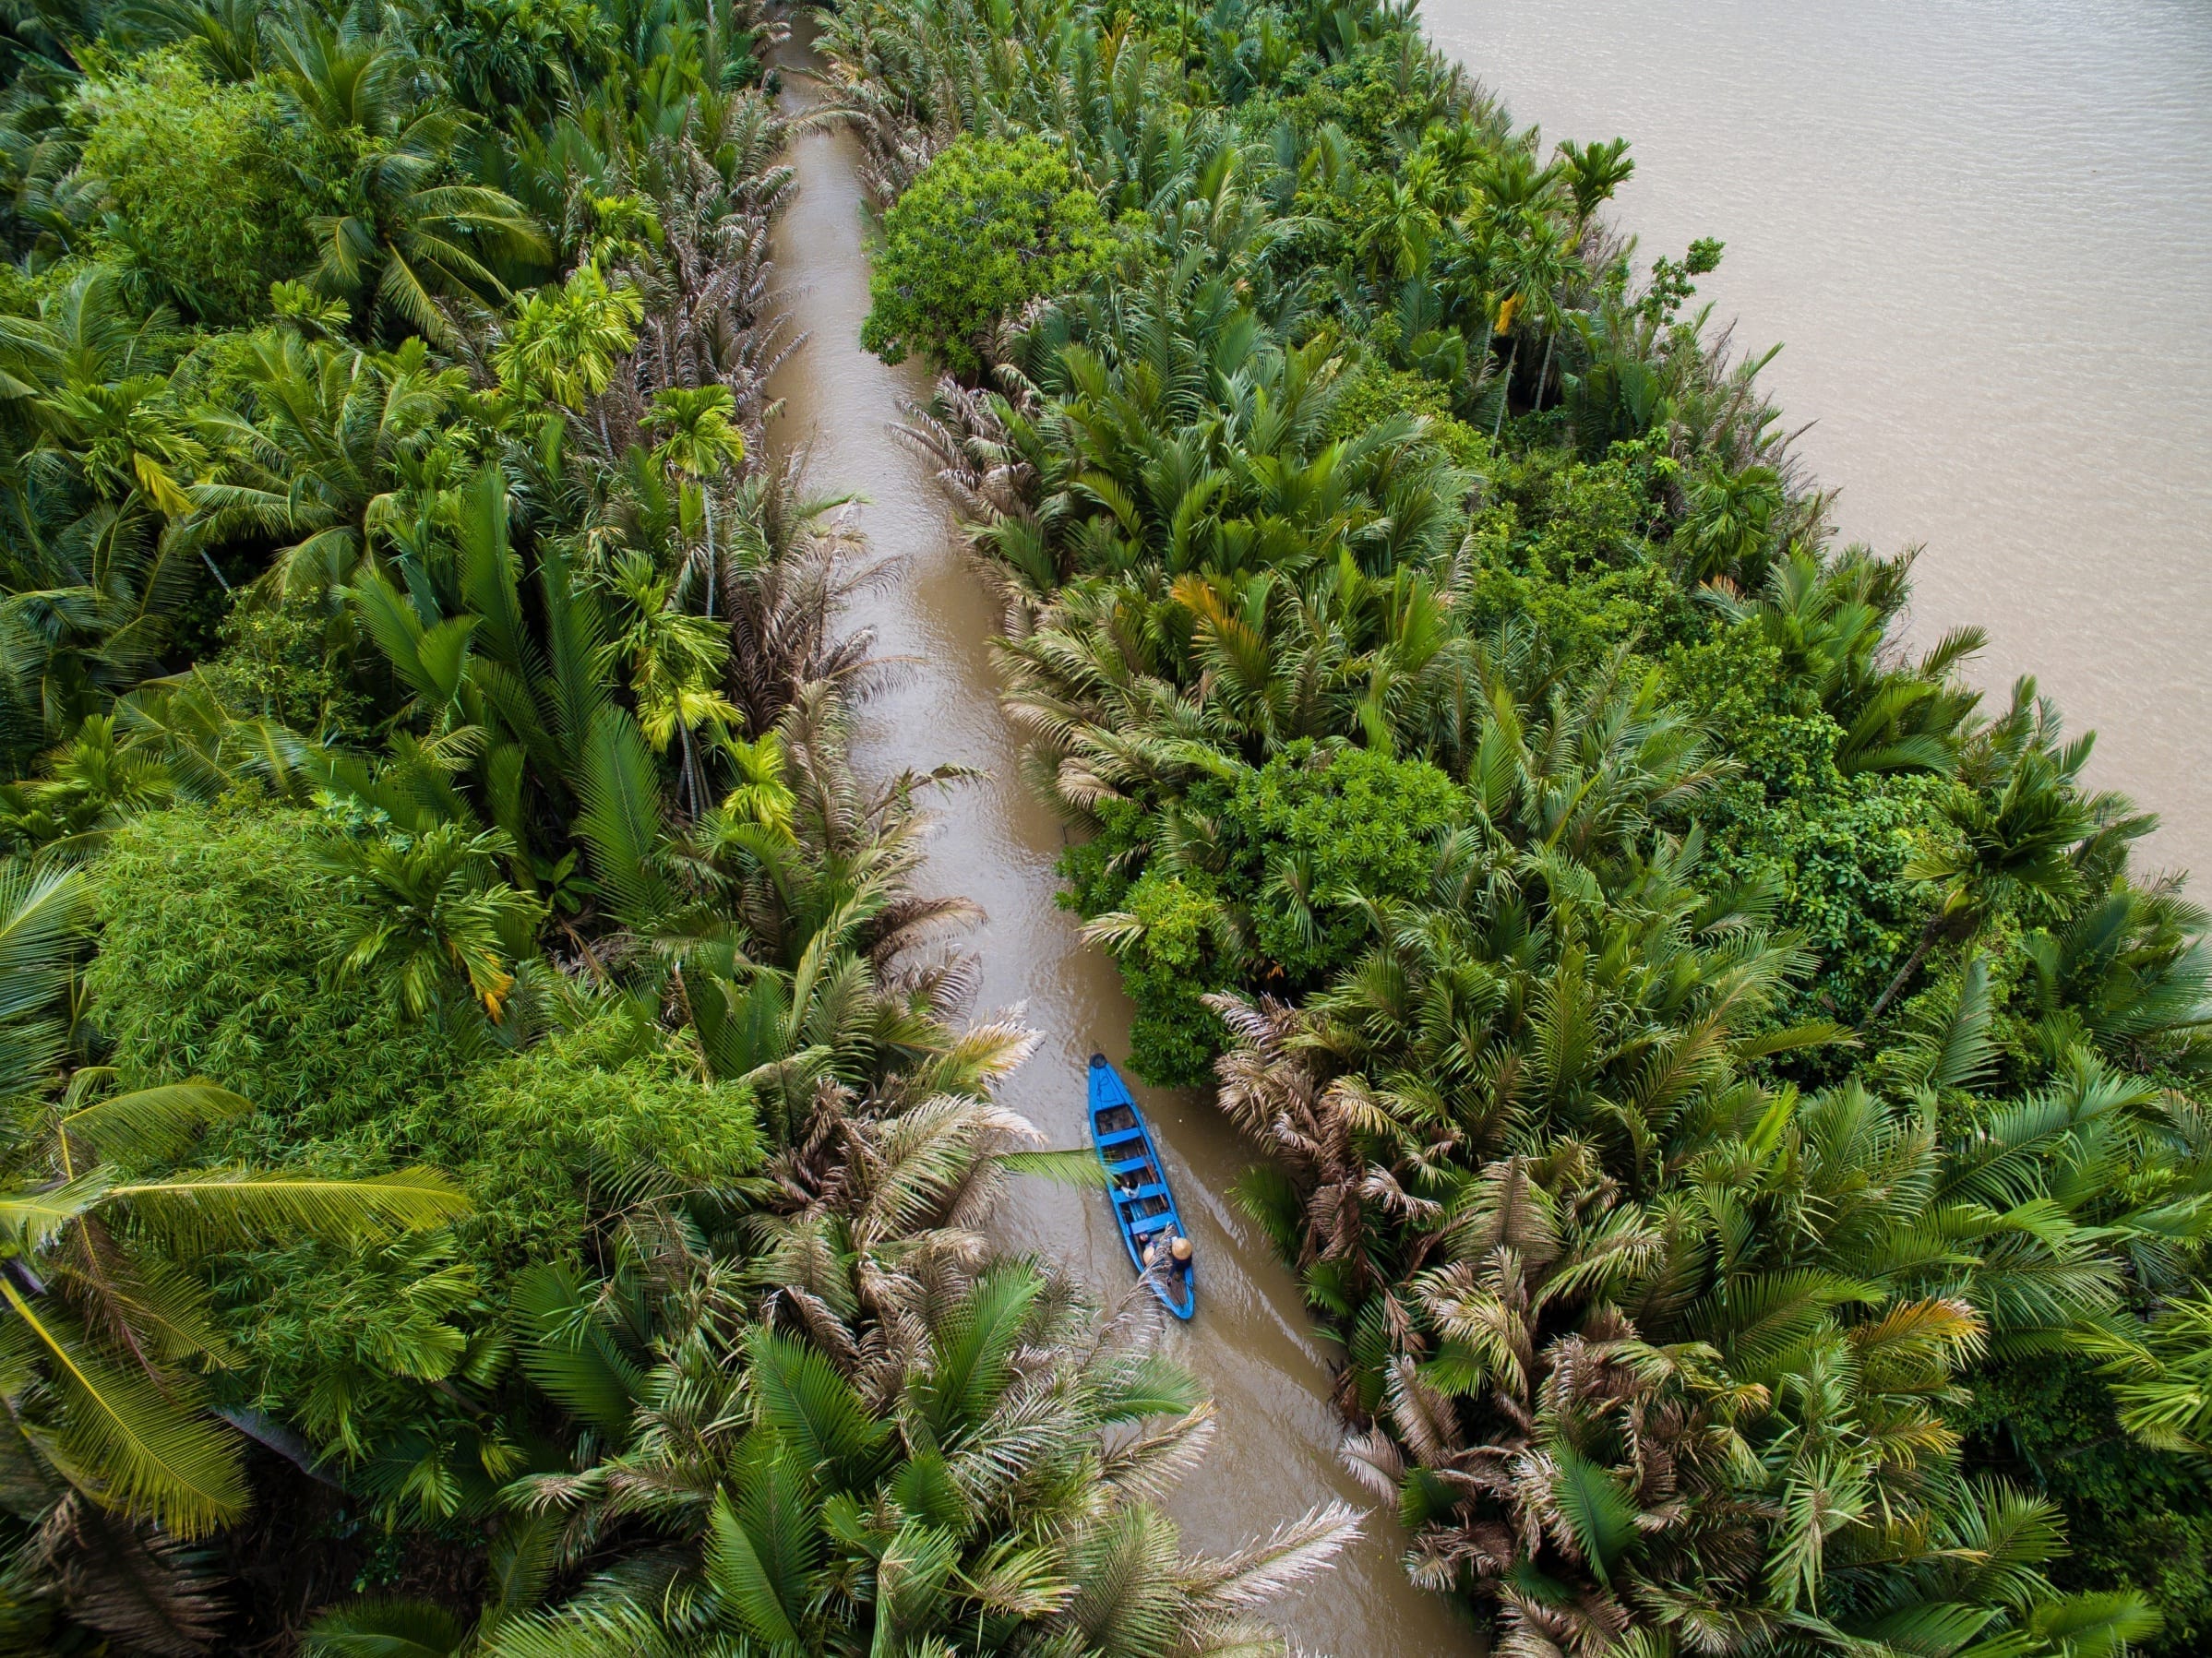 Aerial view of Mekong Delta river in Ben Tre, Vietnam, included in tours offered by Asia Vacation Group